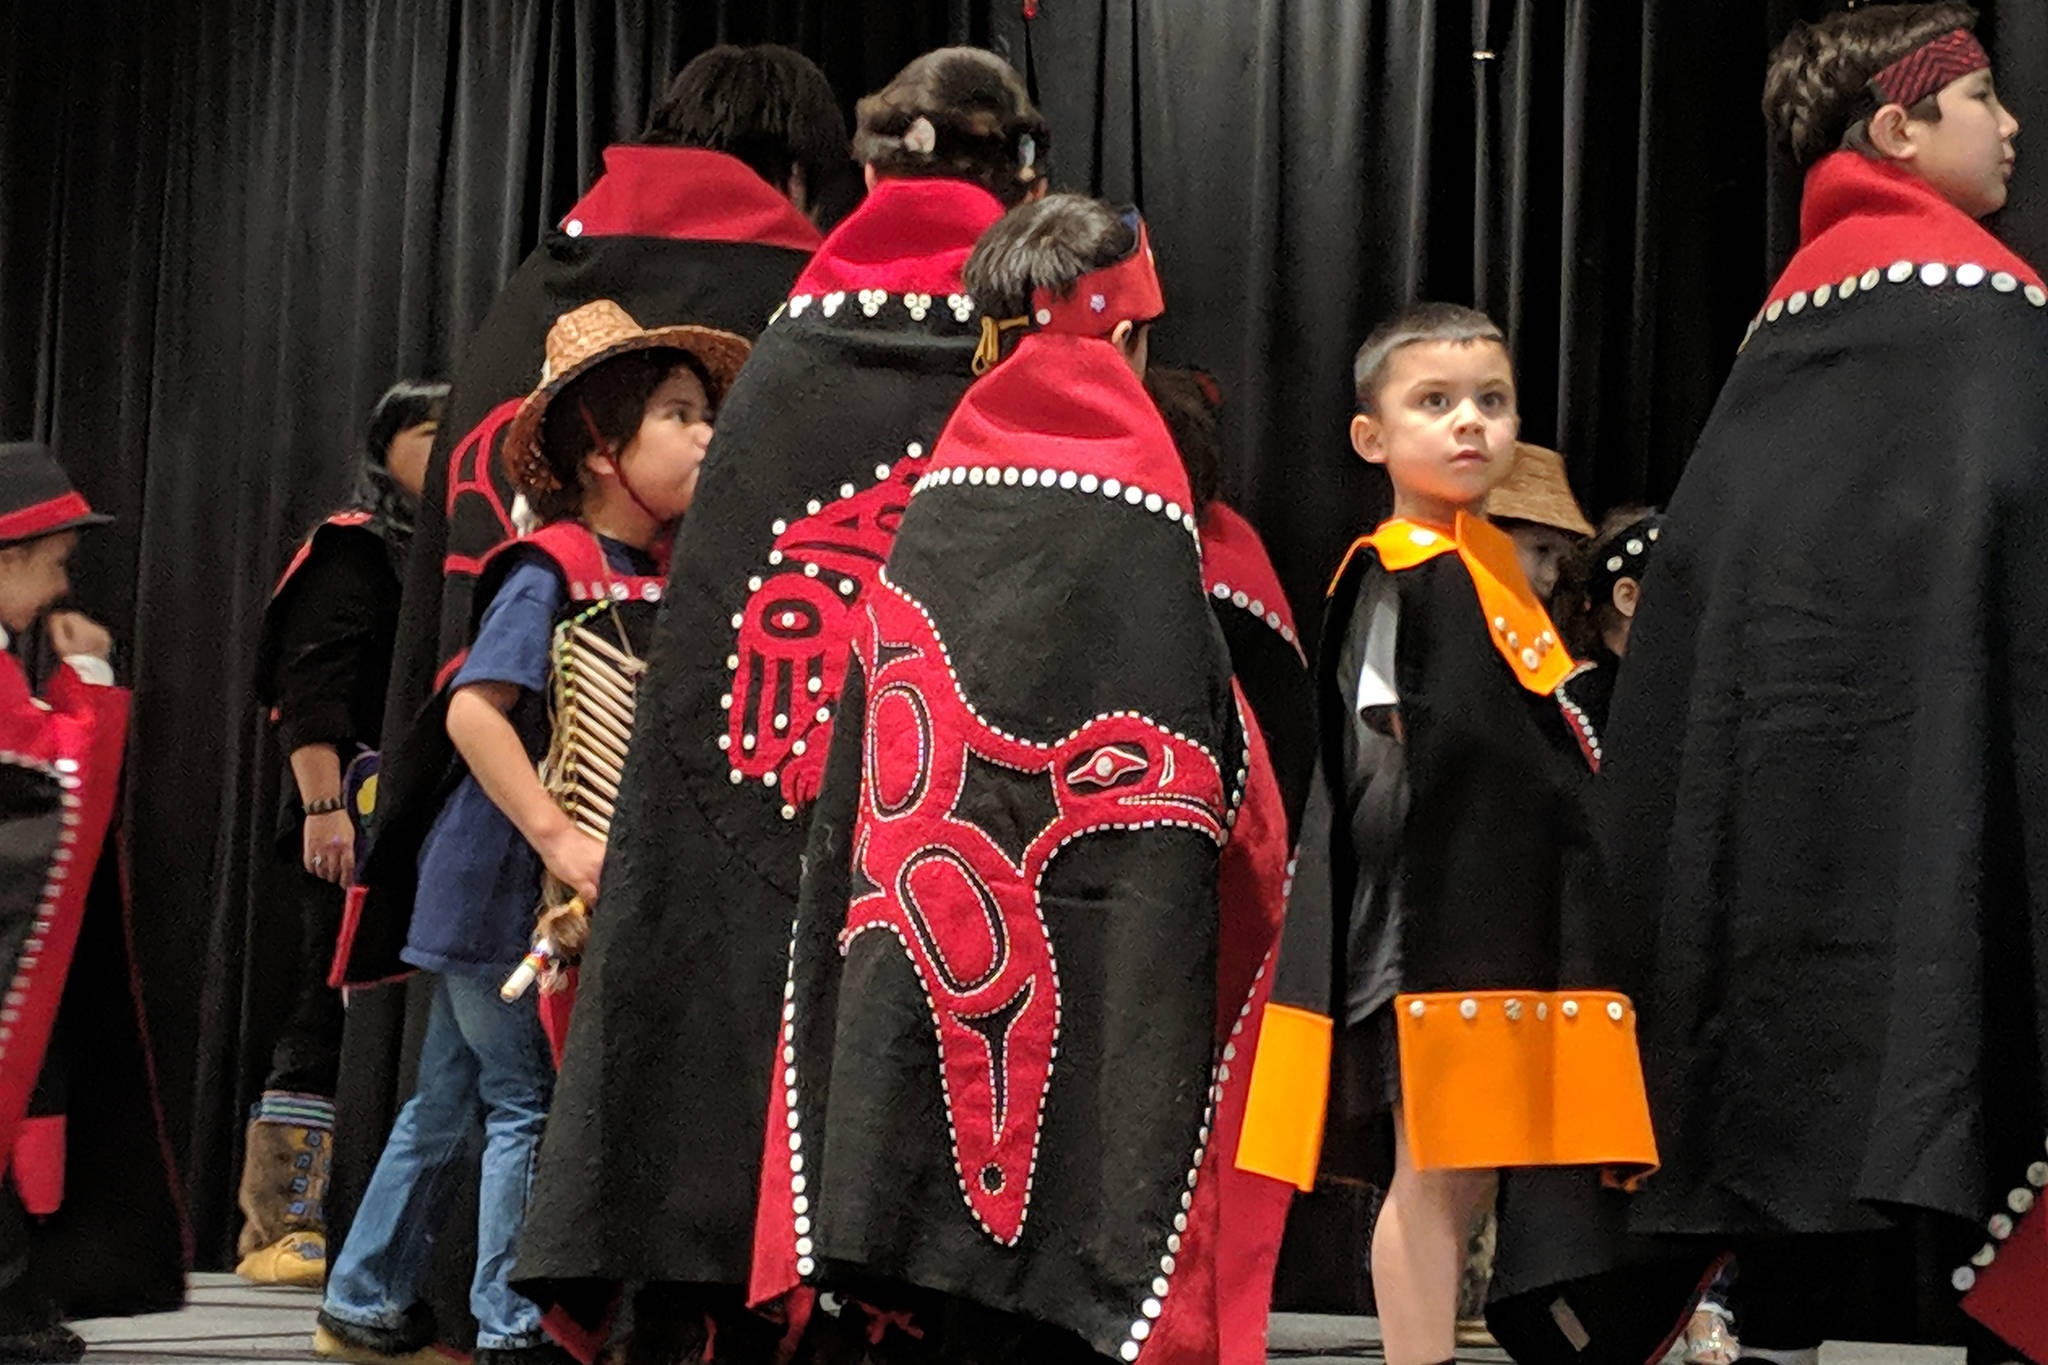 The Children of All Nations Dance Group performs during Rock Your Mocs Saturday, Nov. 10 at the Elizabeth Peratrovich Hall. The first-ever event celebrated Alaska Native culture. (Ben Hohenstatt | Capital City Weekly)